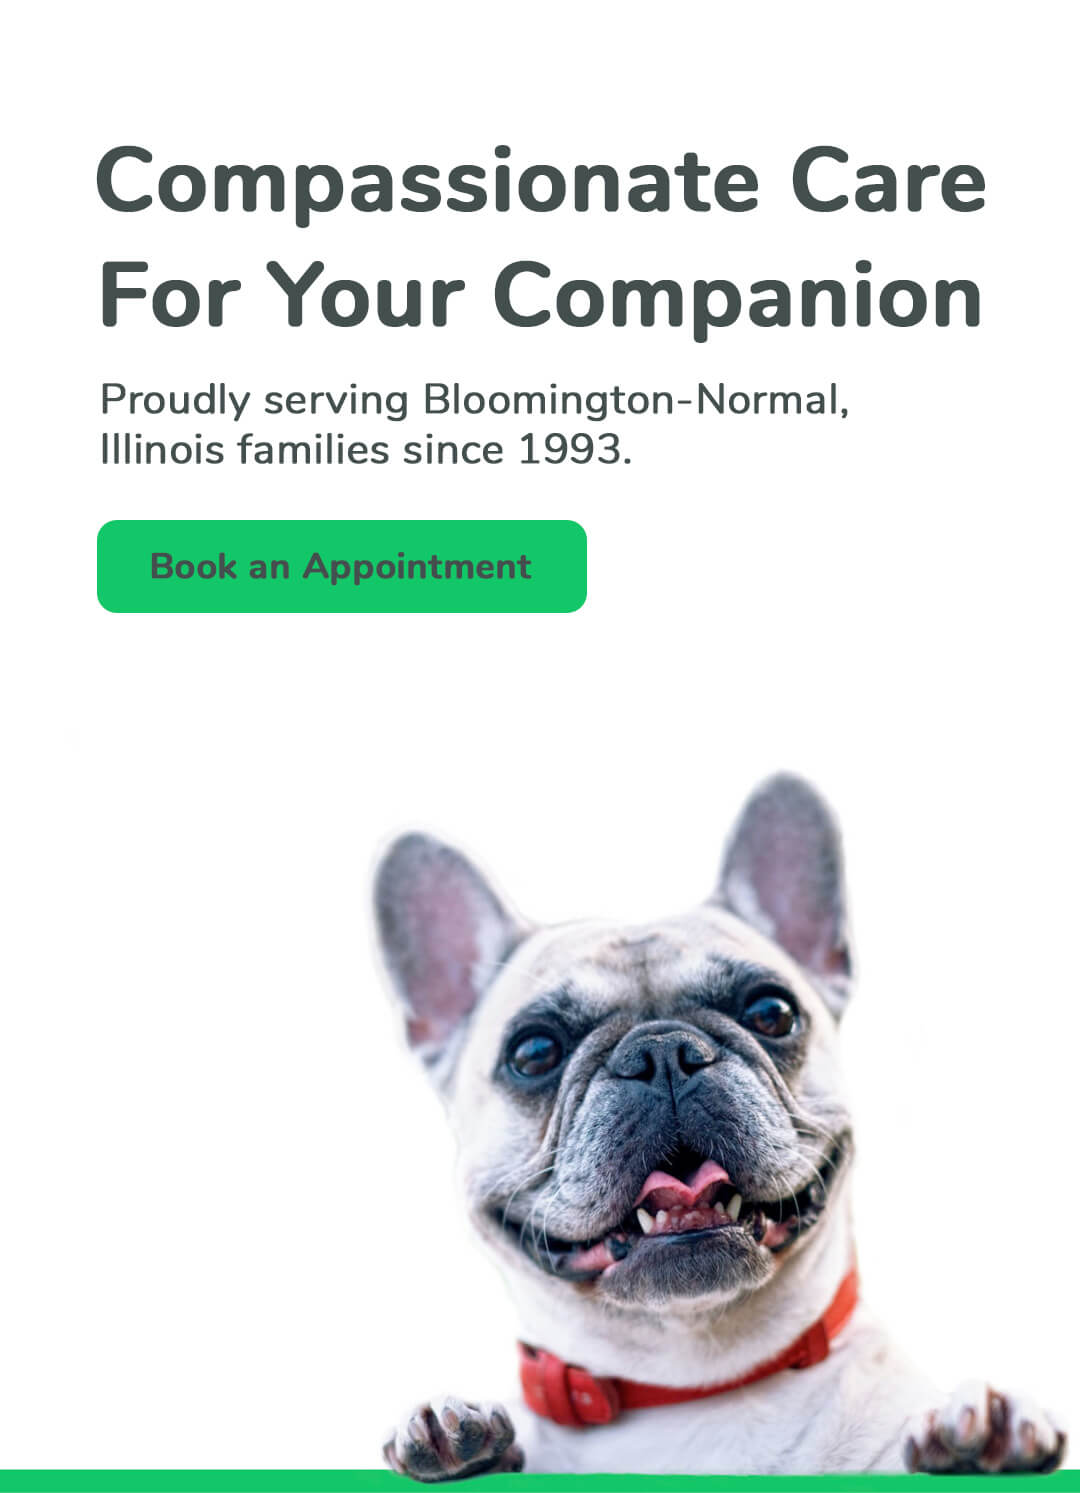 Compassionate Care For Your Companion. Proudly serving Bloomington-Normal, Illinois families since 1993. Book an appointment.